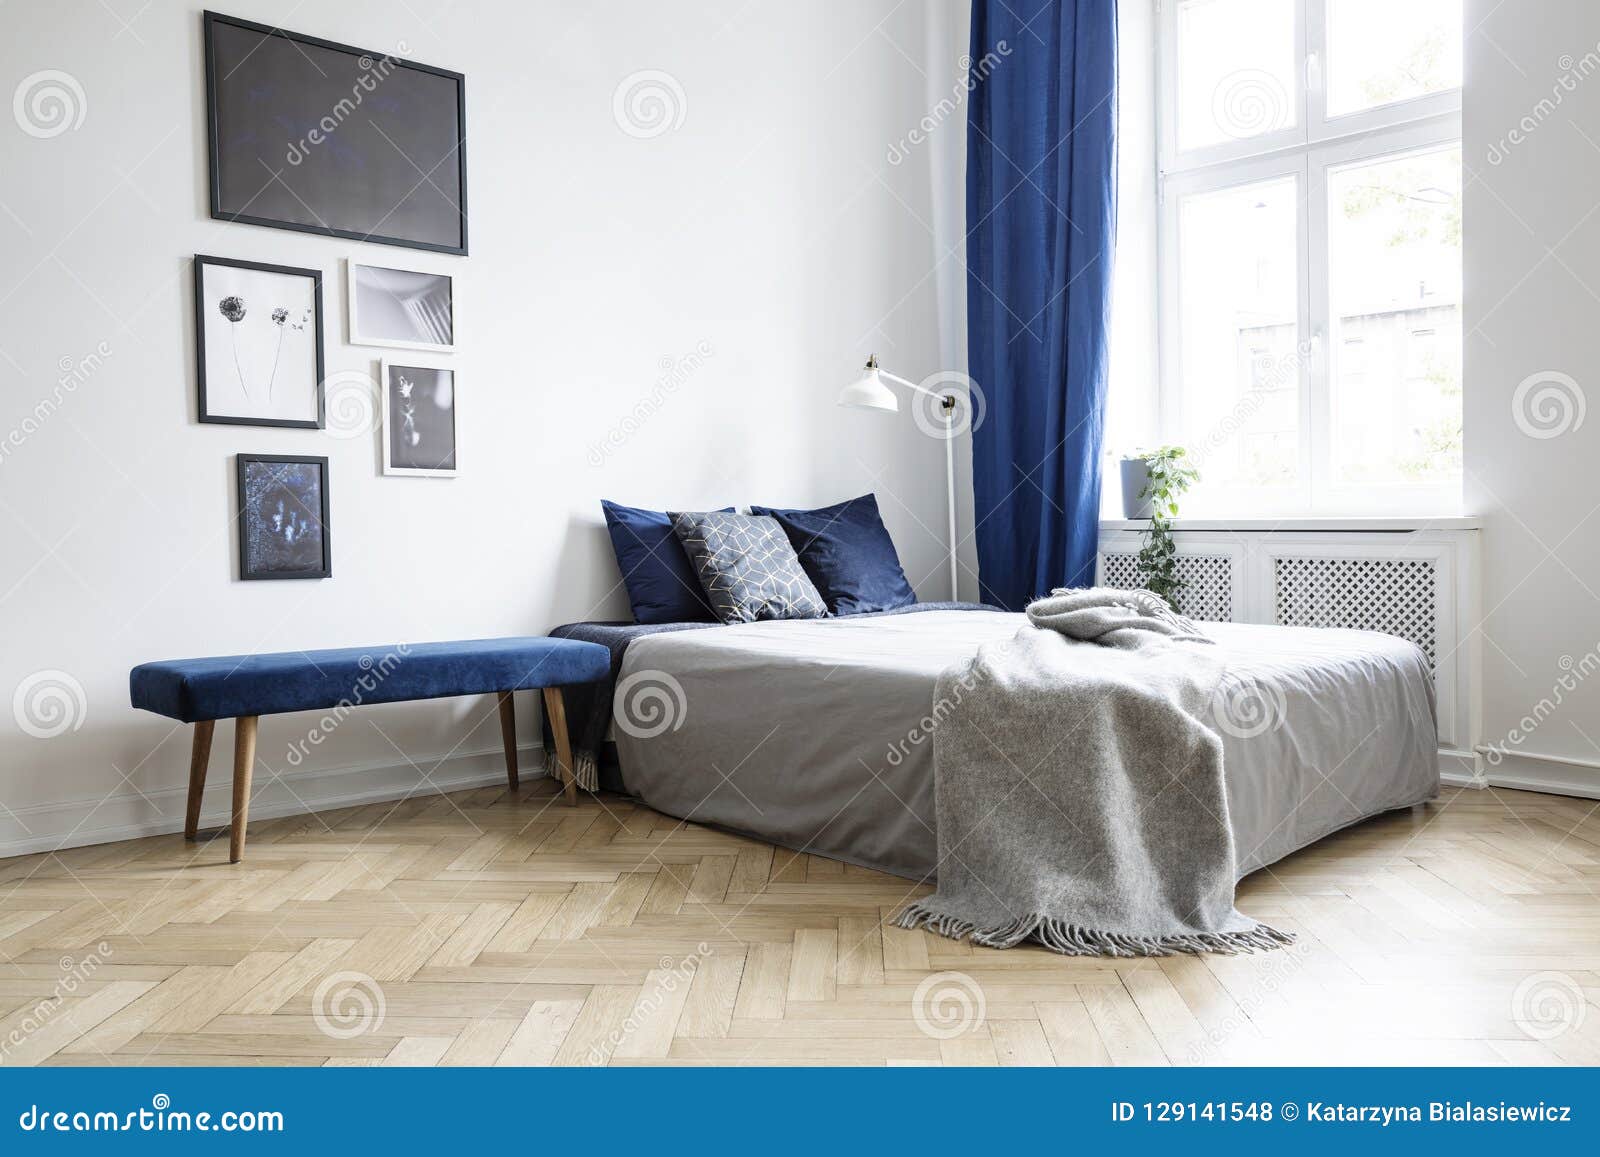 natural light coming through a large window into a white and navy blue bedroom interior with cozy bed and wooden floor